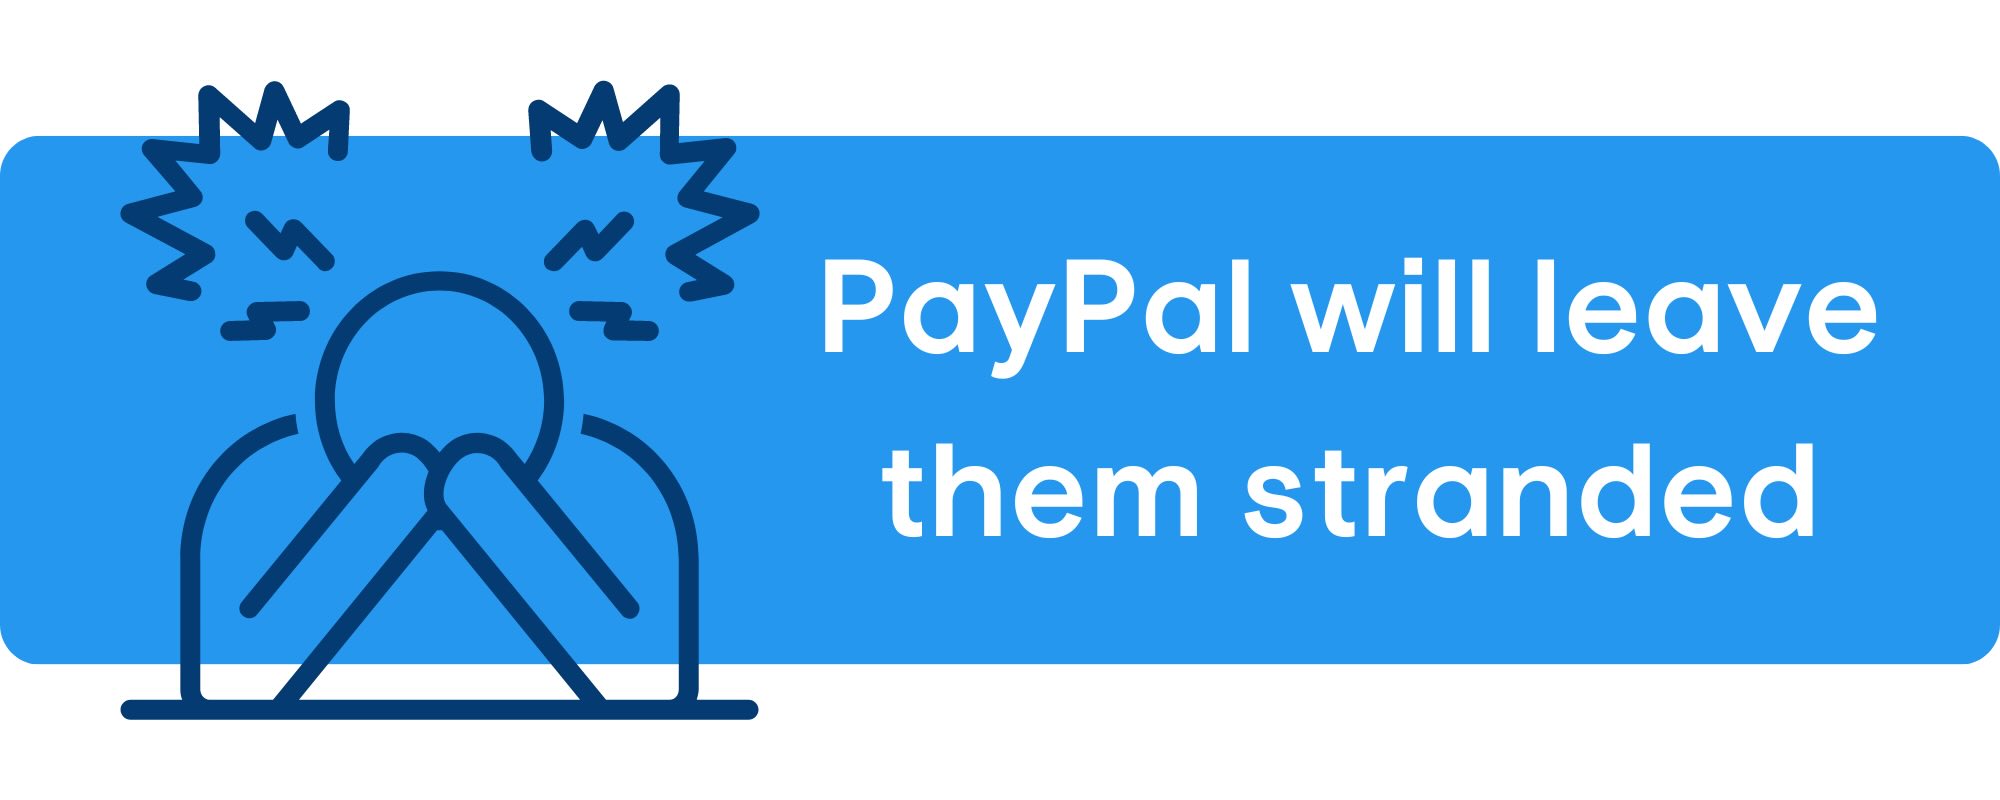 PayPal for churches: The ugly truth